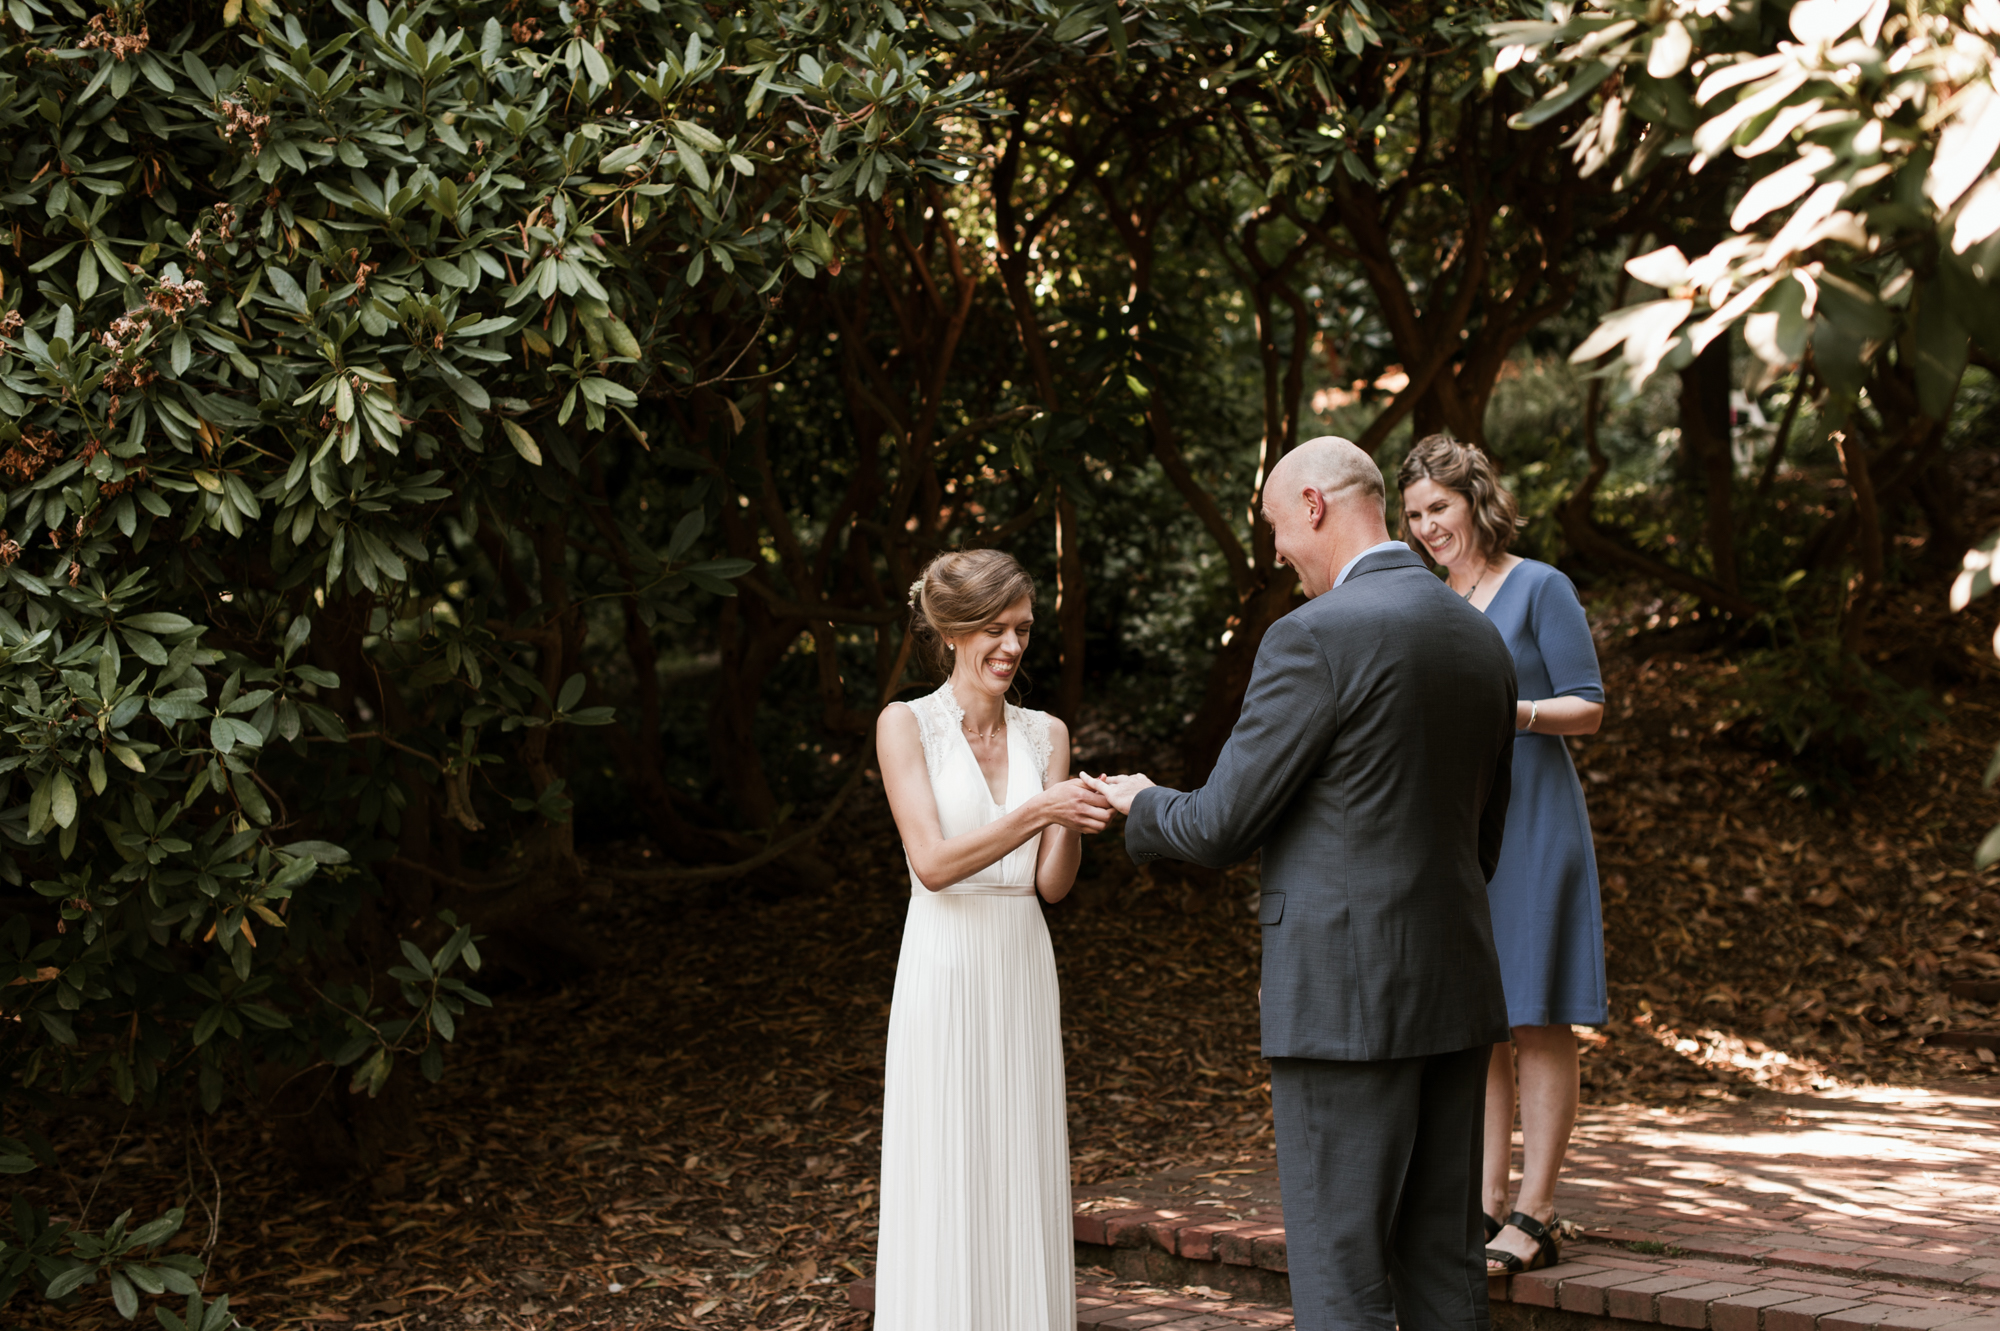 The bride puts a ring on it. By Laurelhurst Park wedding photographer Briana Morrison